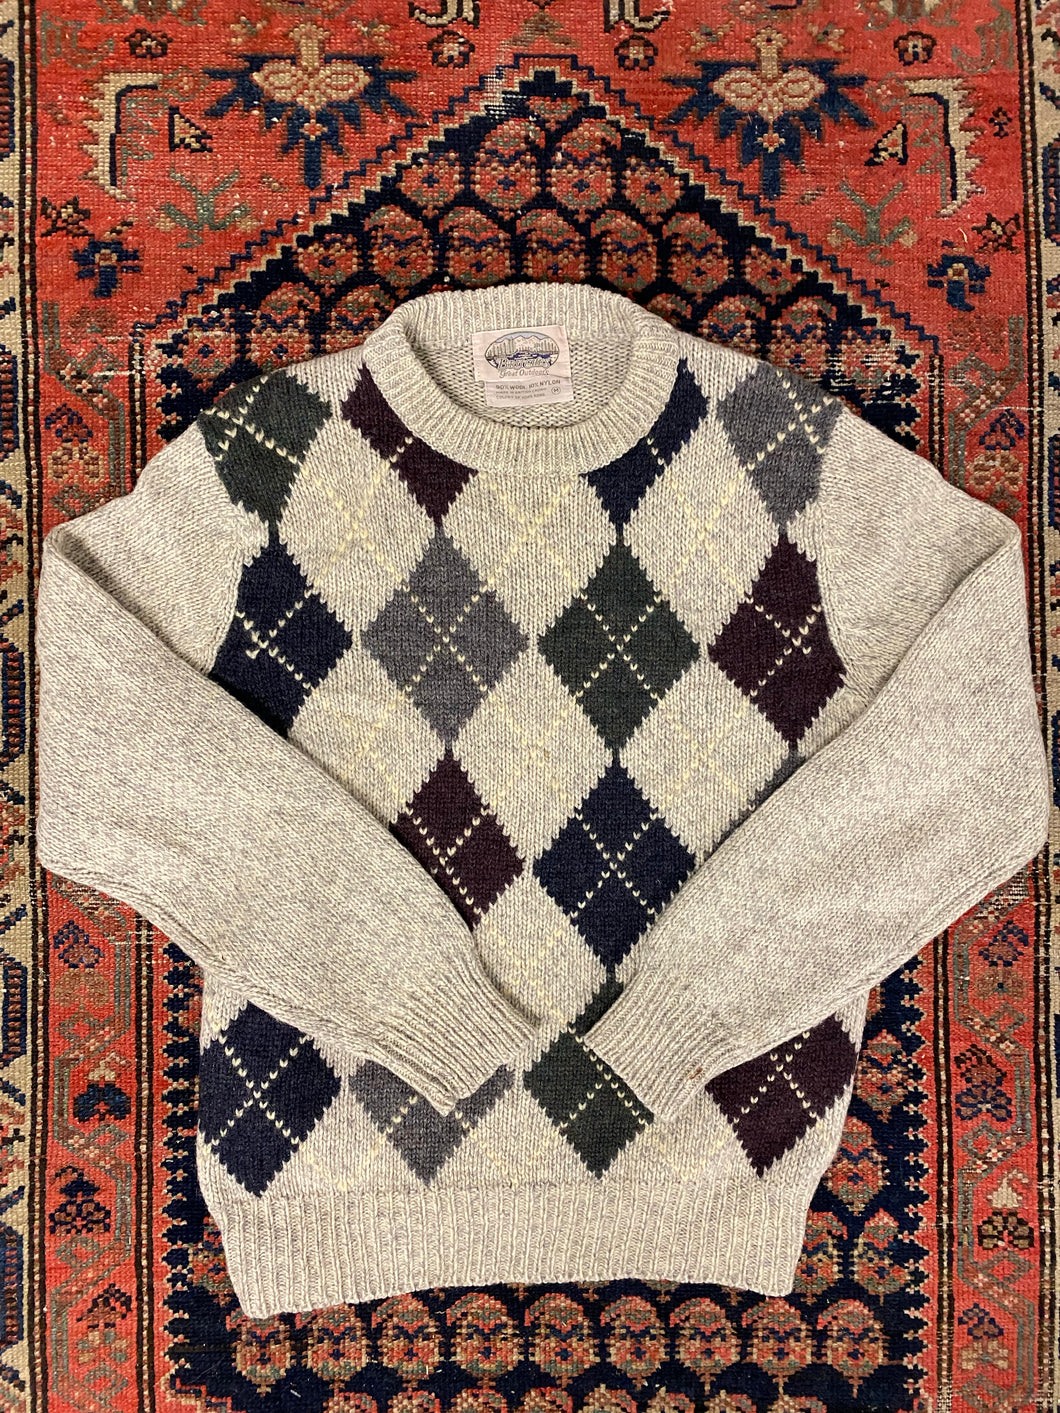 90s Patterned Knit Sweater - S